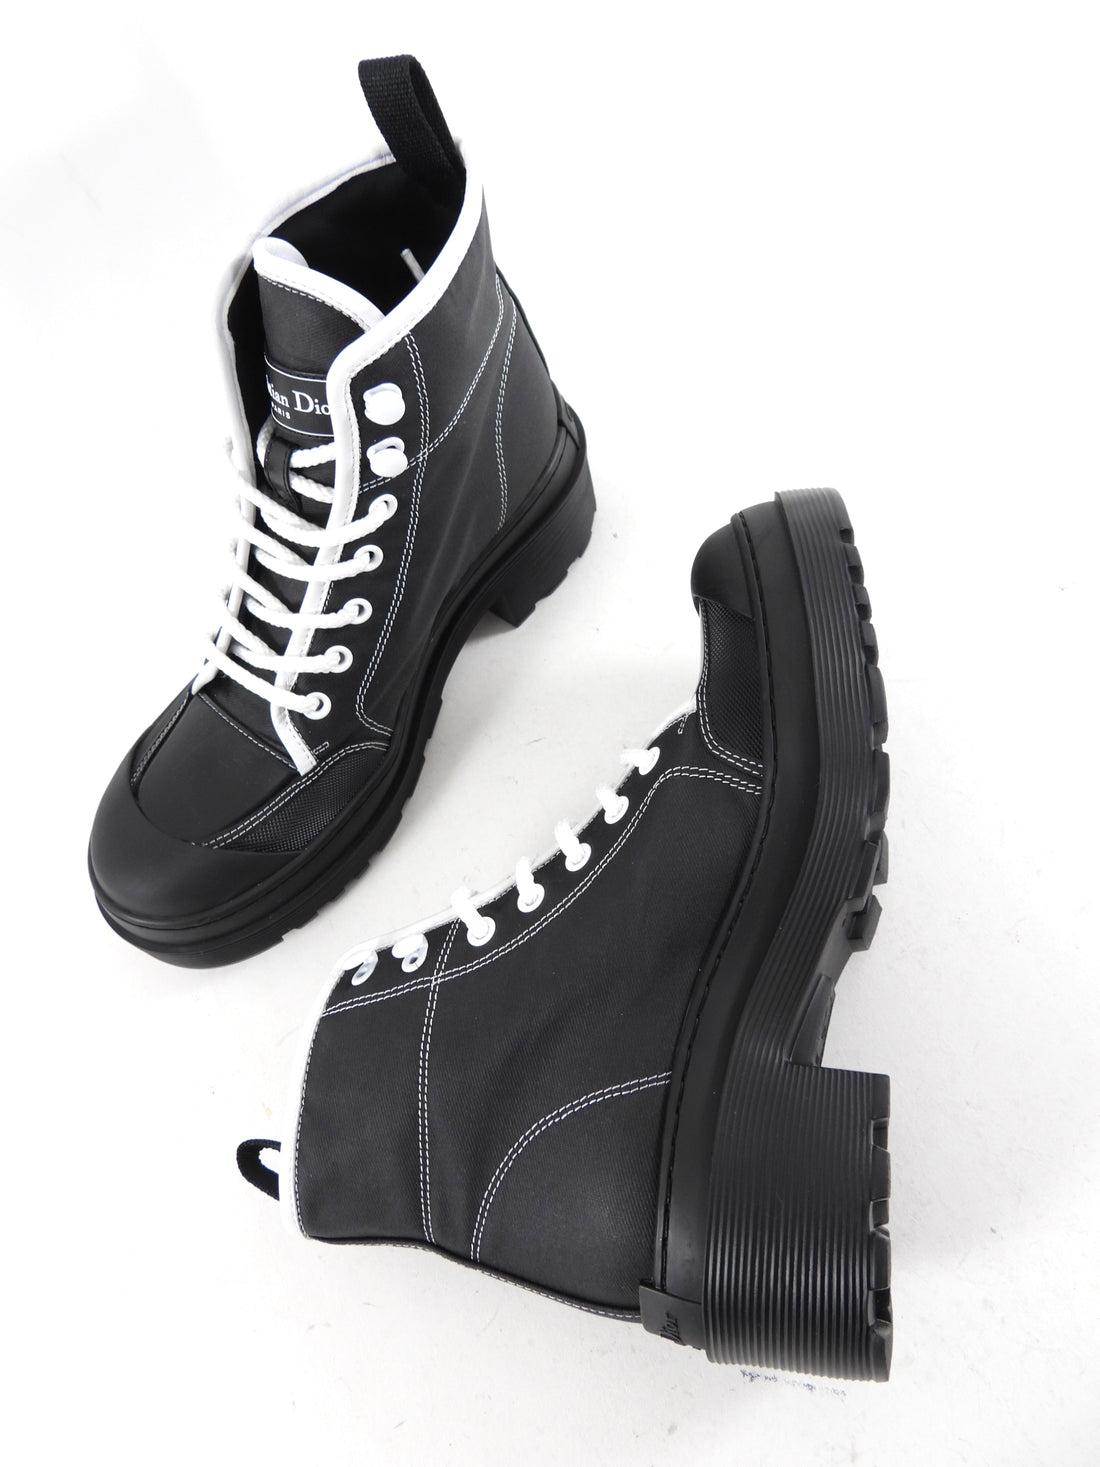 Dior Black and White Lace Up Ankle Boots - 36.5